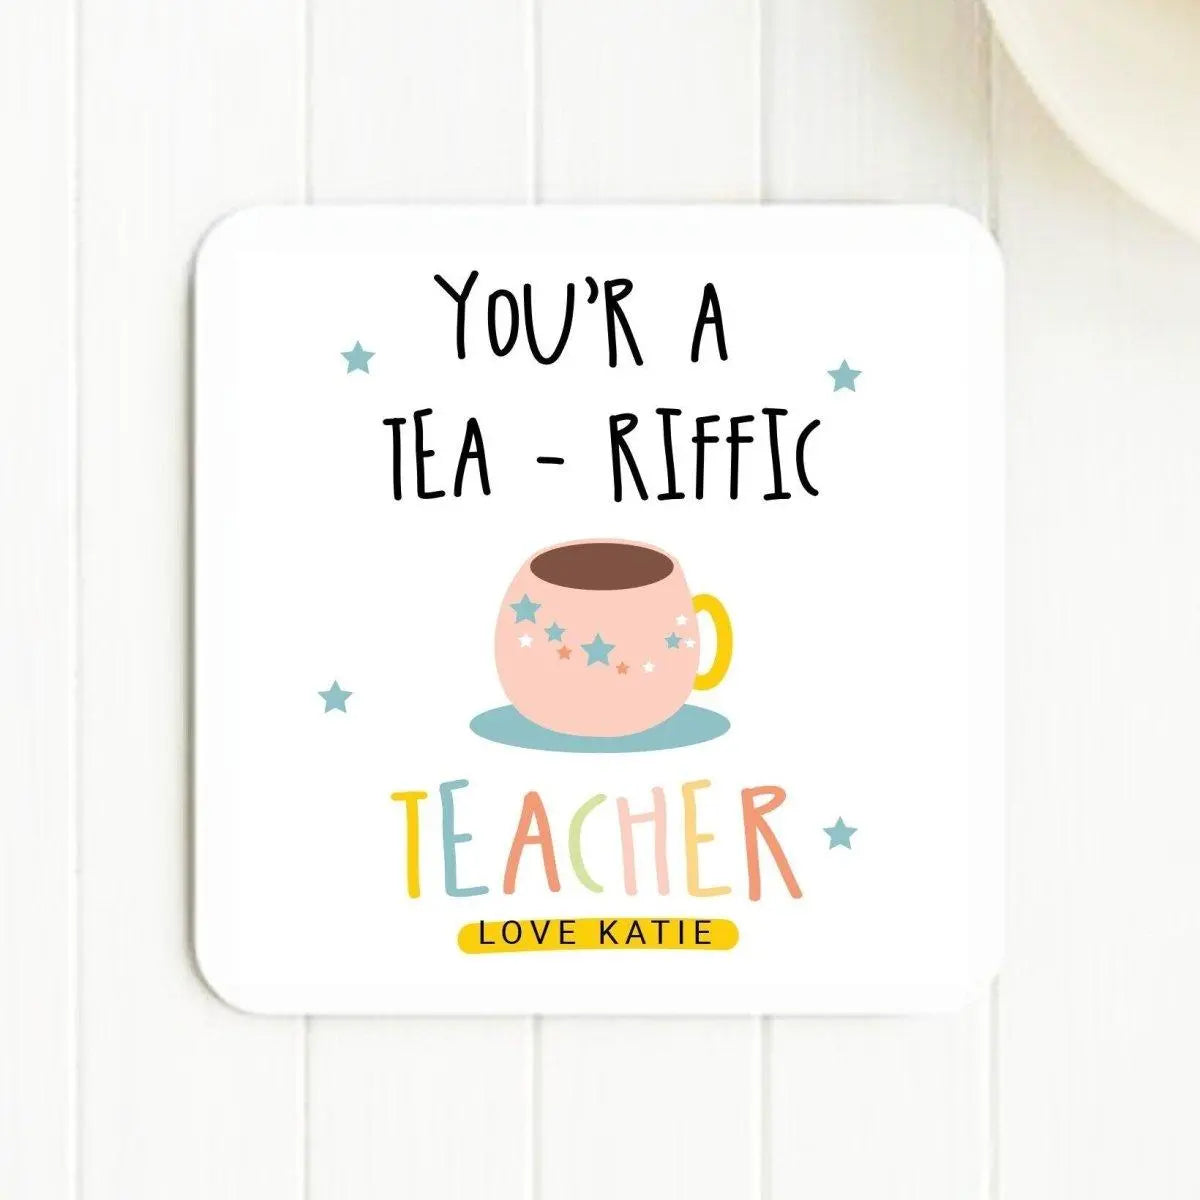 Personalised Tea- Riffic Teacher Coaster, Appreciation Teacher Gift, Teacher Gifts, Personalised Tea Gift, Teaching Assistant - Amy Lucy